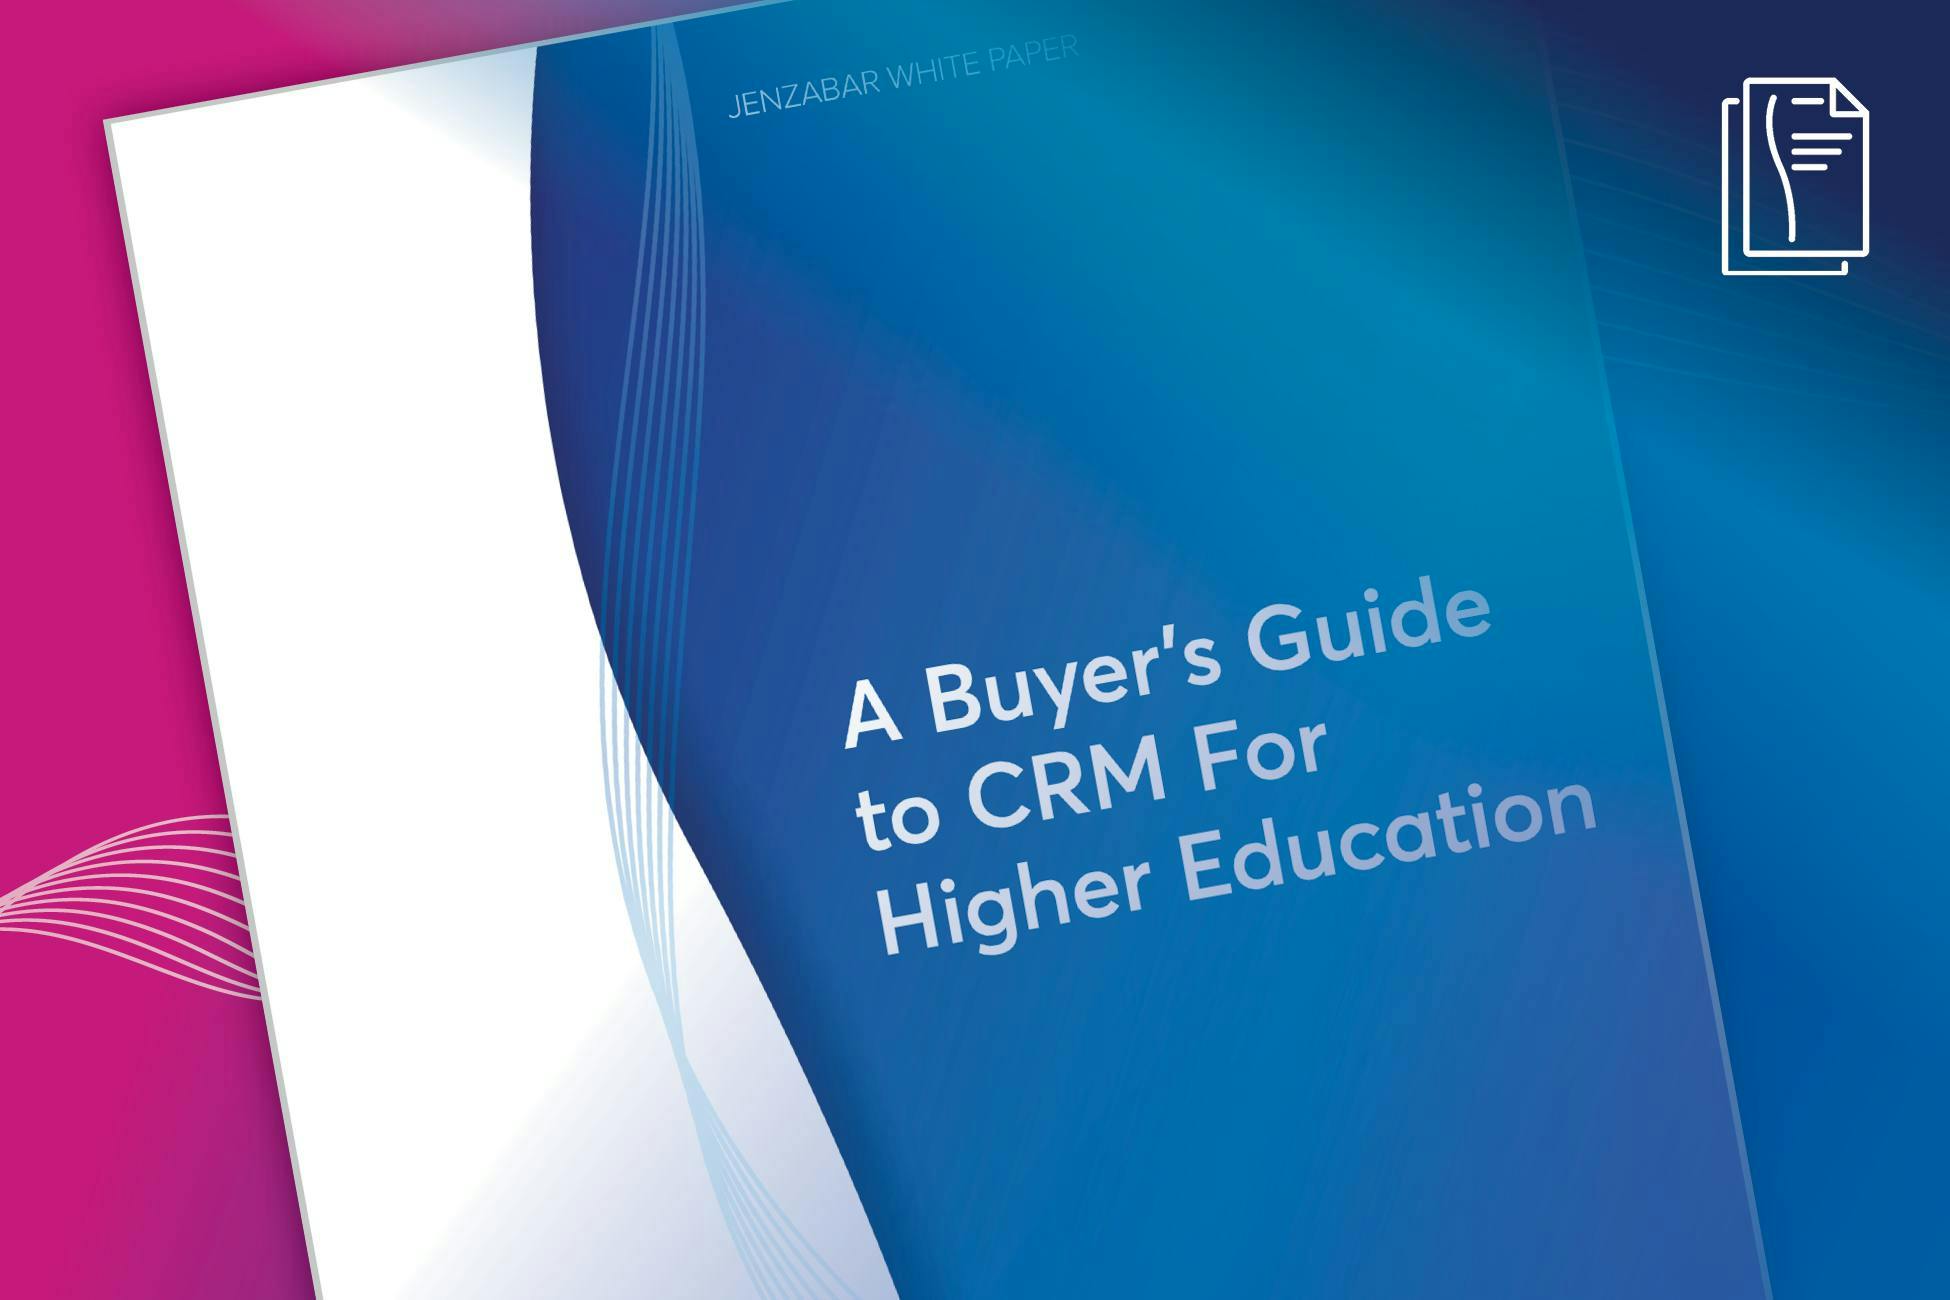 White Paper: A Buyer's Guide to CRM for Higher Education